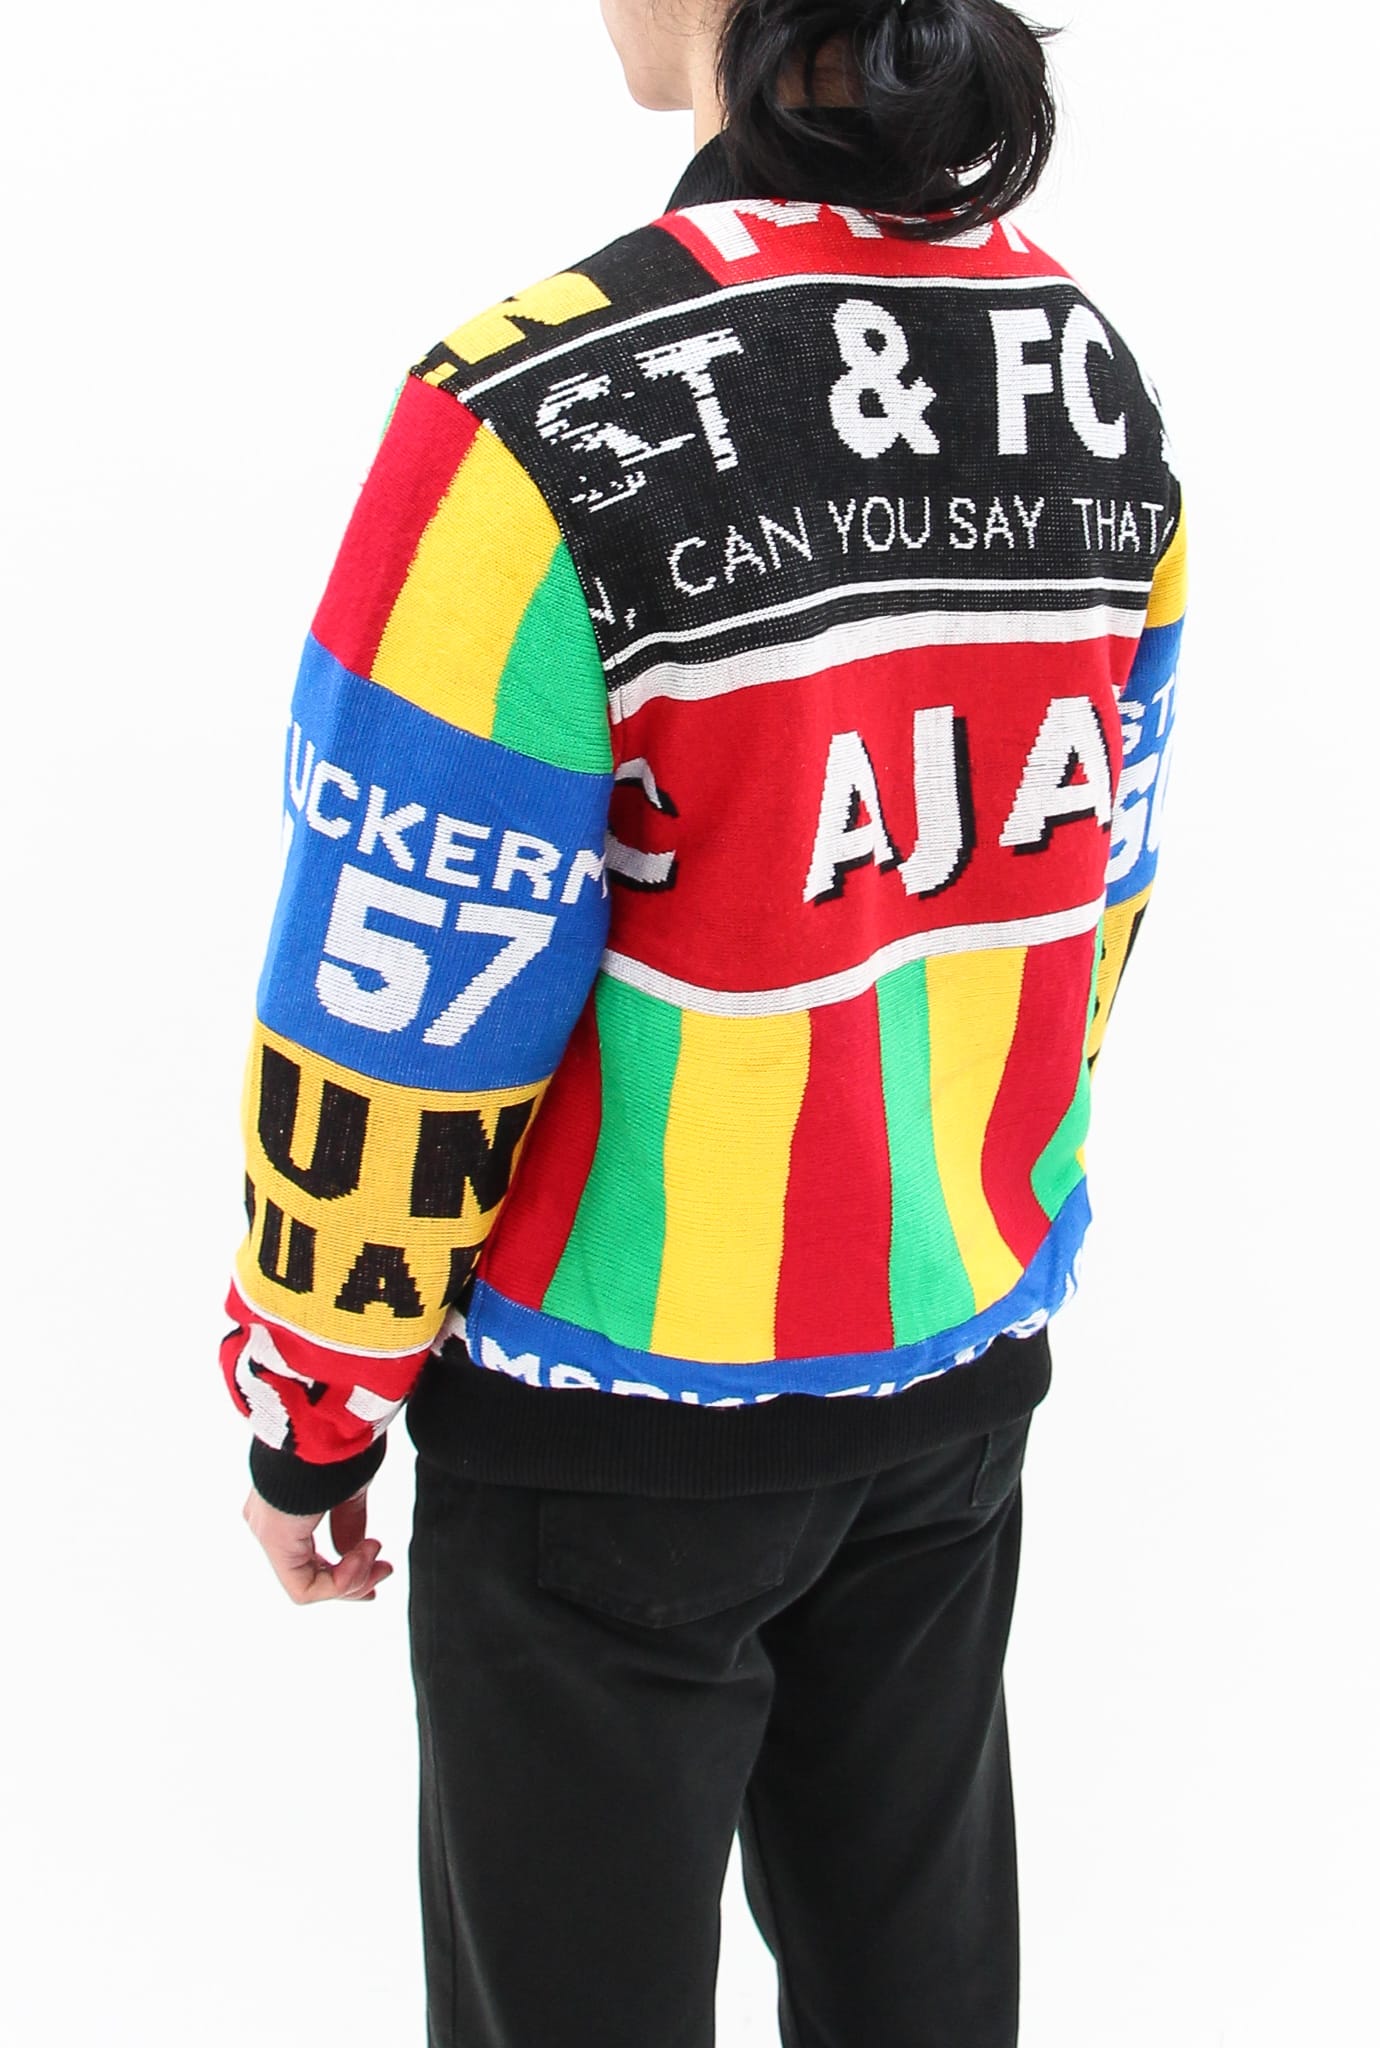 AM Re-Worked Football Scarf Jacket #26 - American Madness